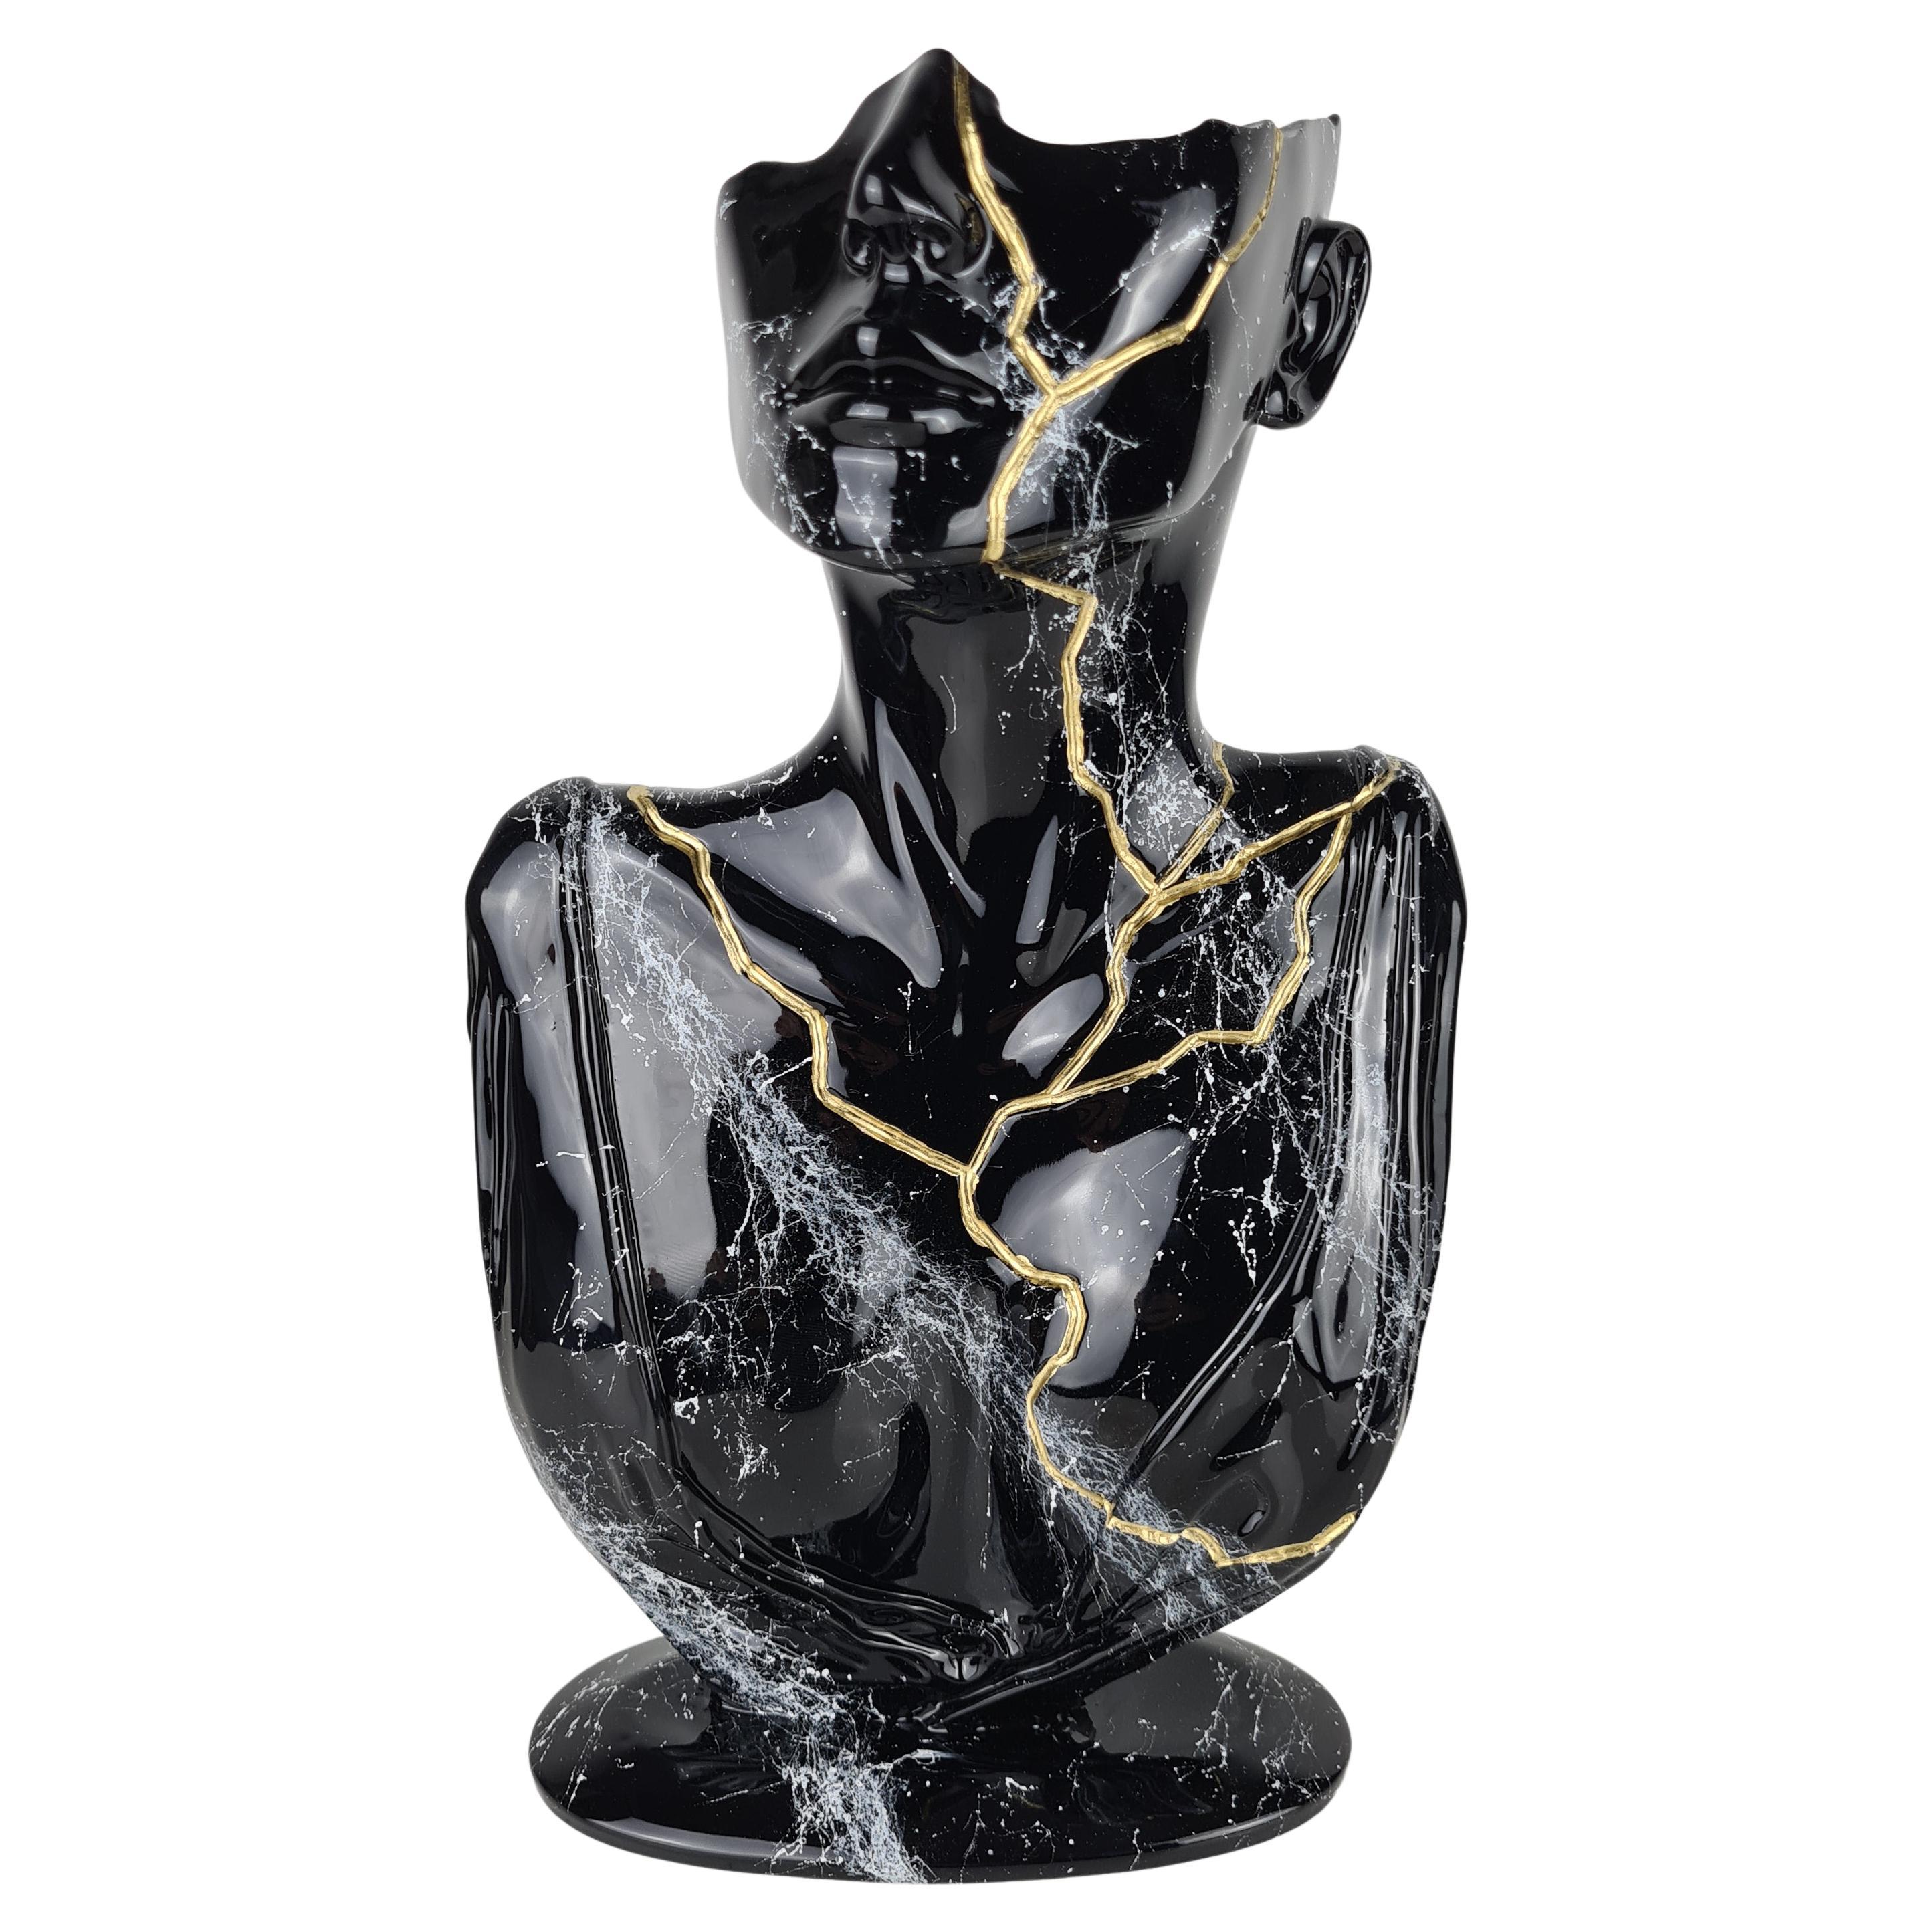 "Tired Face", Black & Gold, 2021, Sculpture with Marble Powder and Resin. Ltd. For Sale